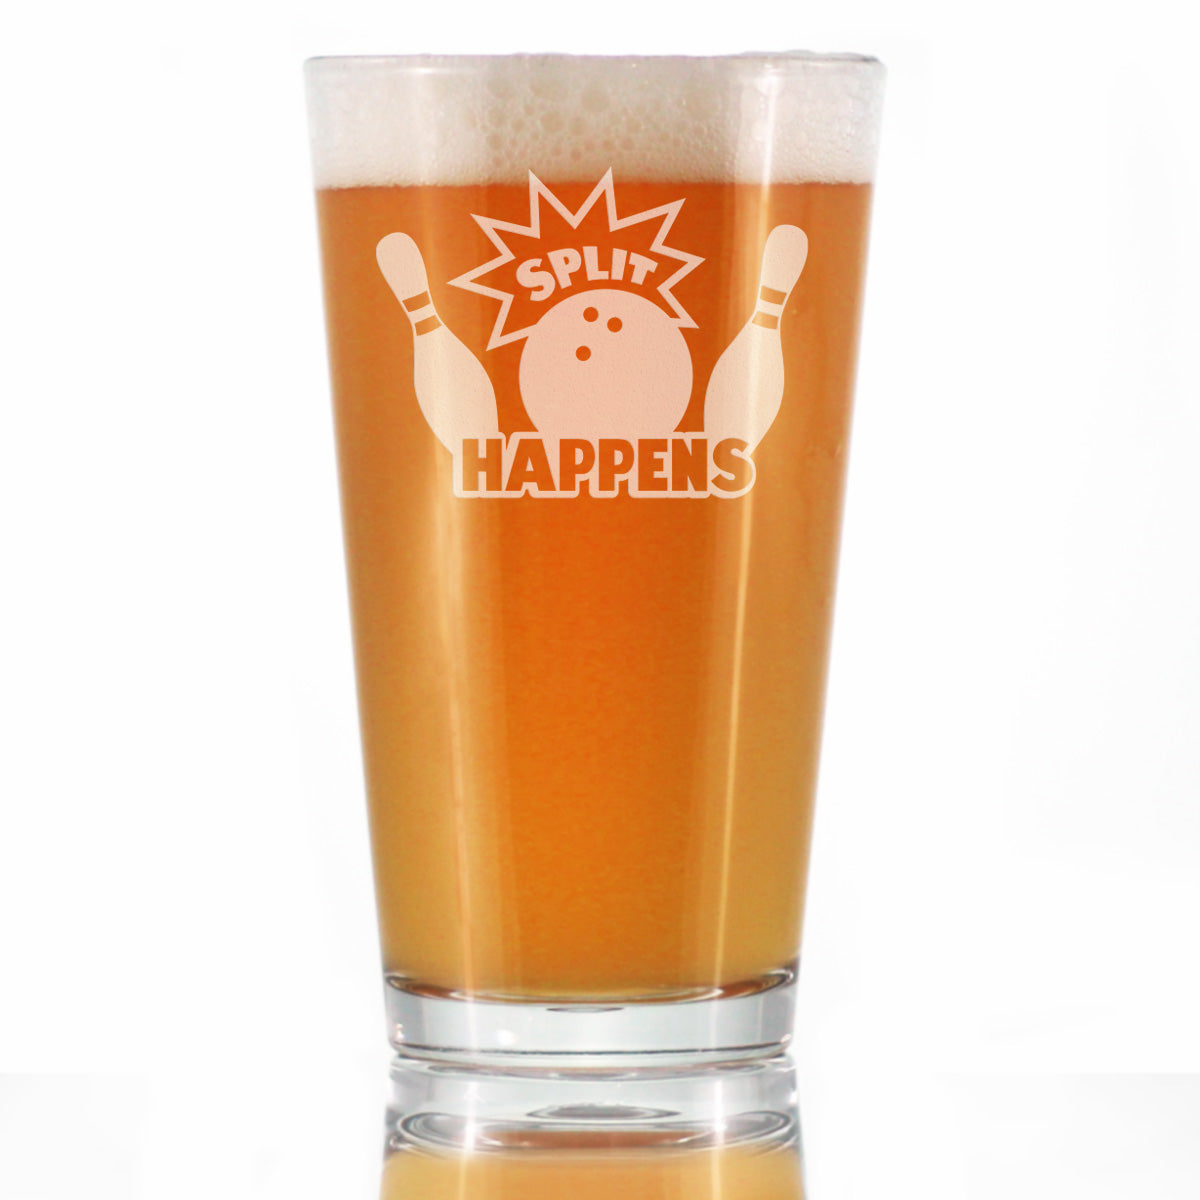 Split Happens - Pint Glass for Beer - Funny Bowling Themed Gifts and Decor for Bowlers - 16 oz Glass